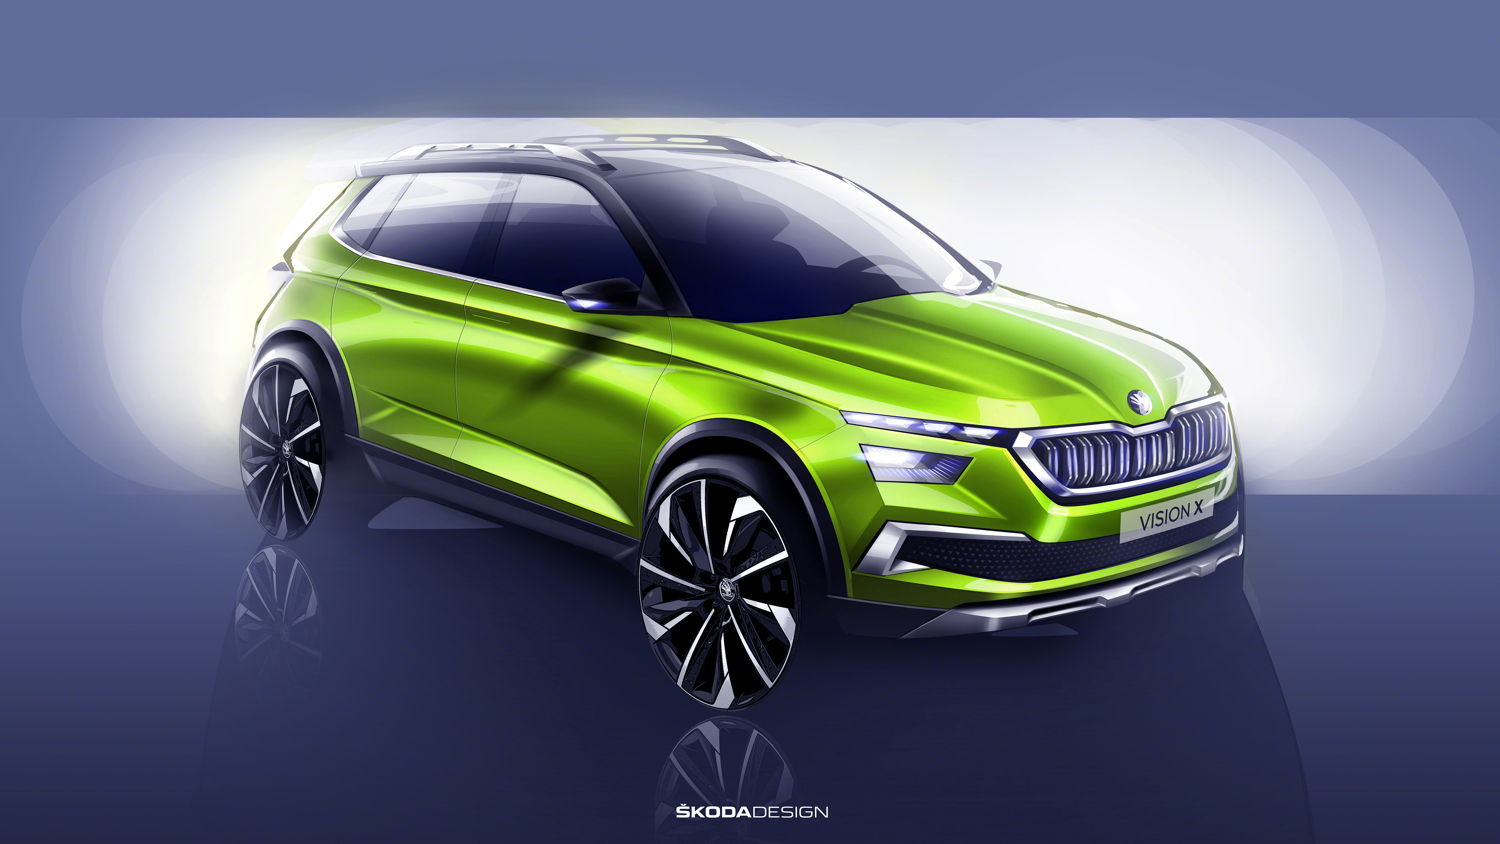 An entirely new design language ensures a modern, high-quality and expressive interior in the ŠKODA VISION X.